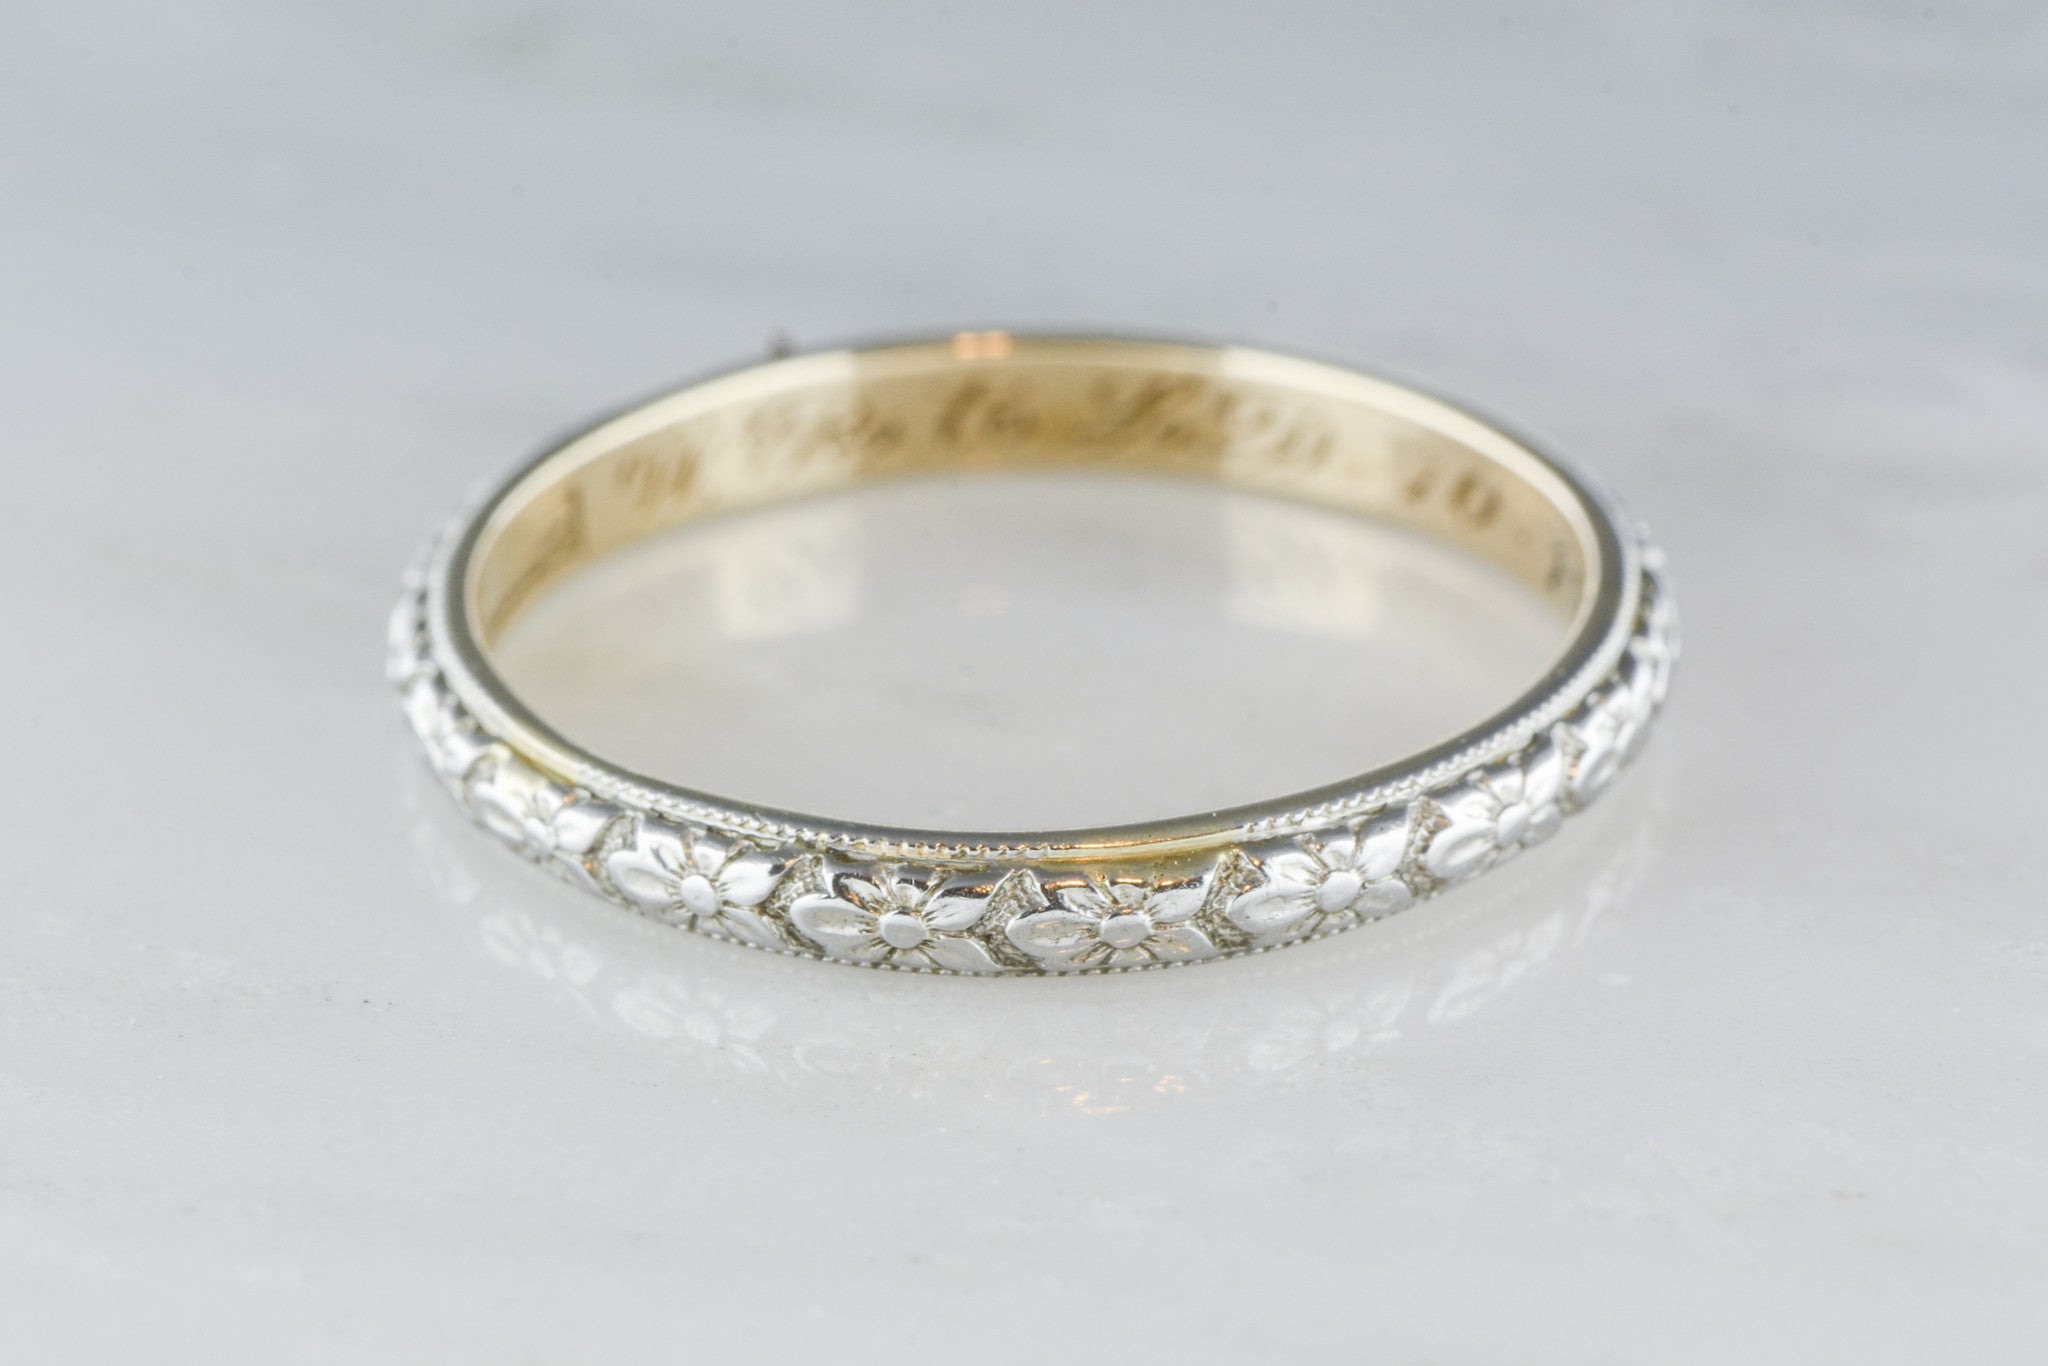  Antique  Two Tone Men s  Victorian 14K Gold Wedding  Band  